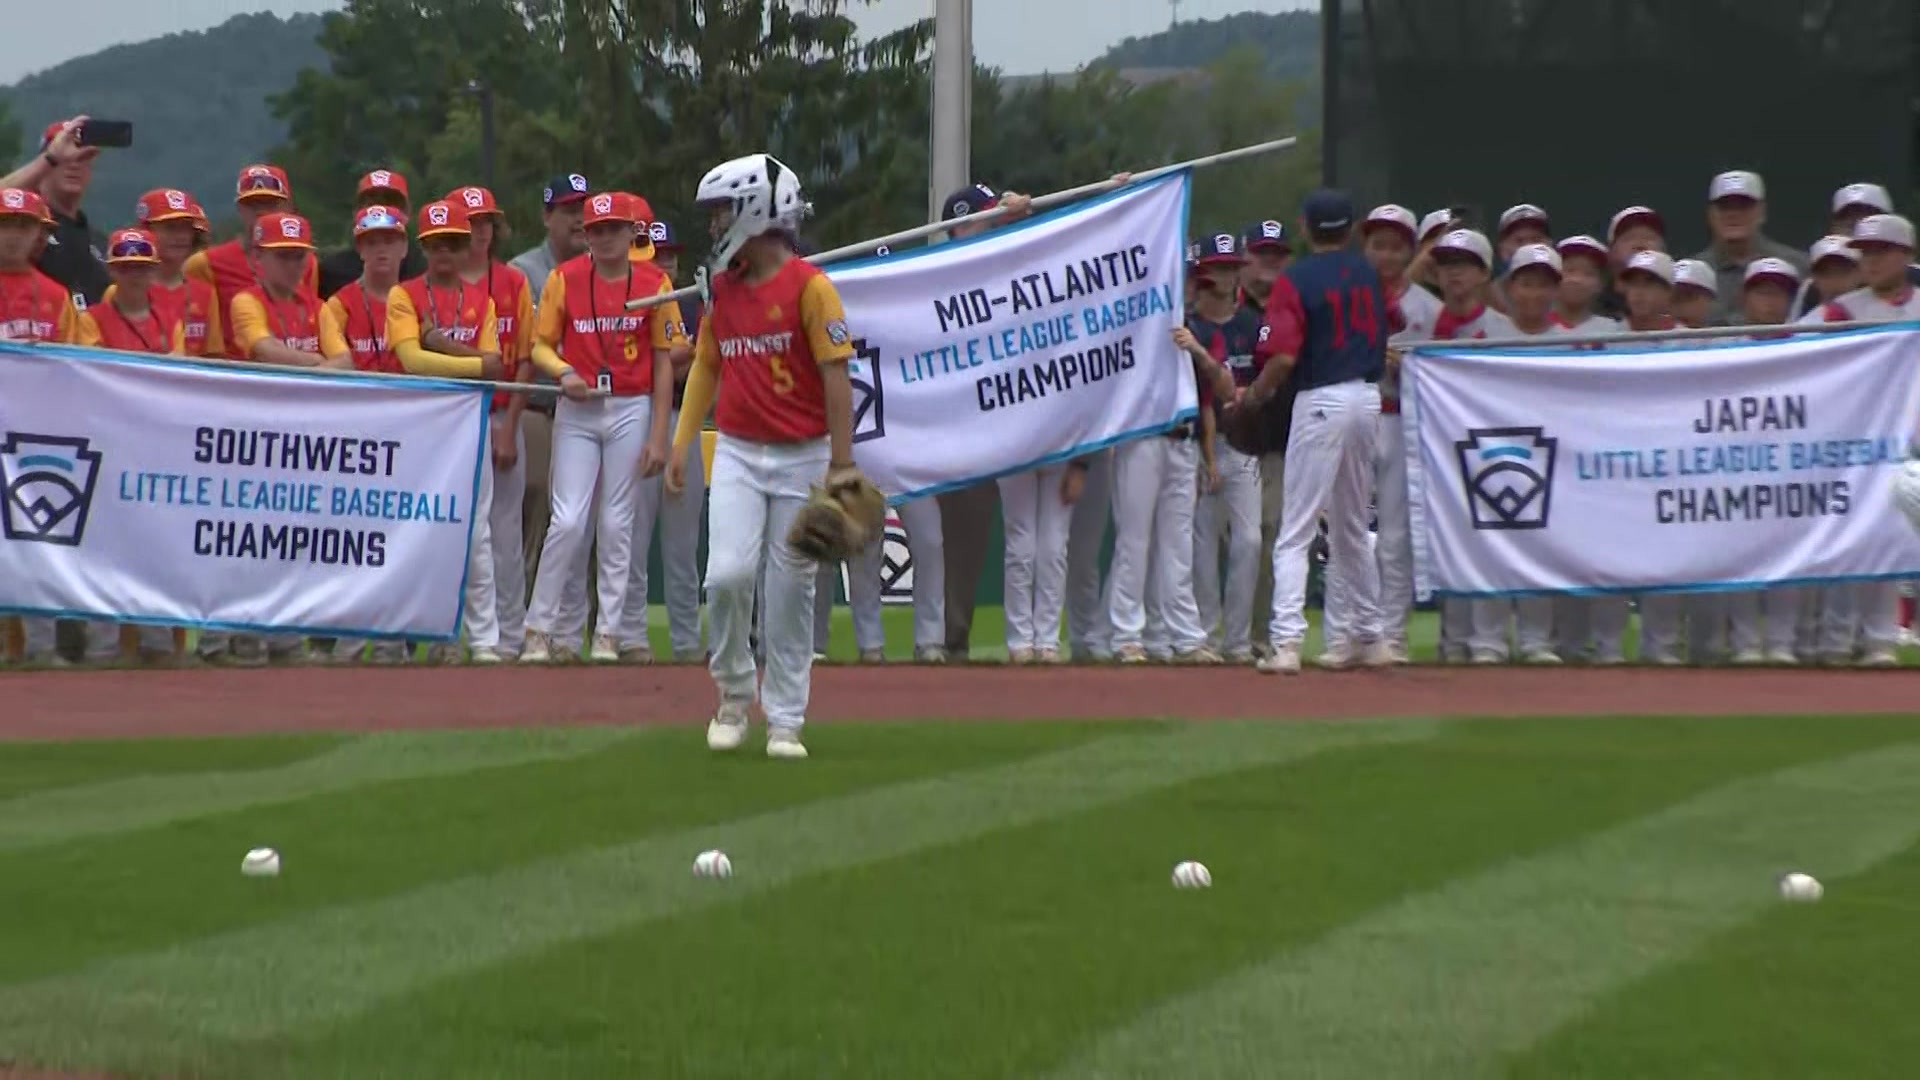 City rallies around Pearland All Stars ahead of Little League World Series